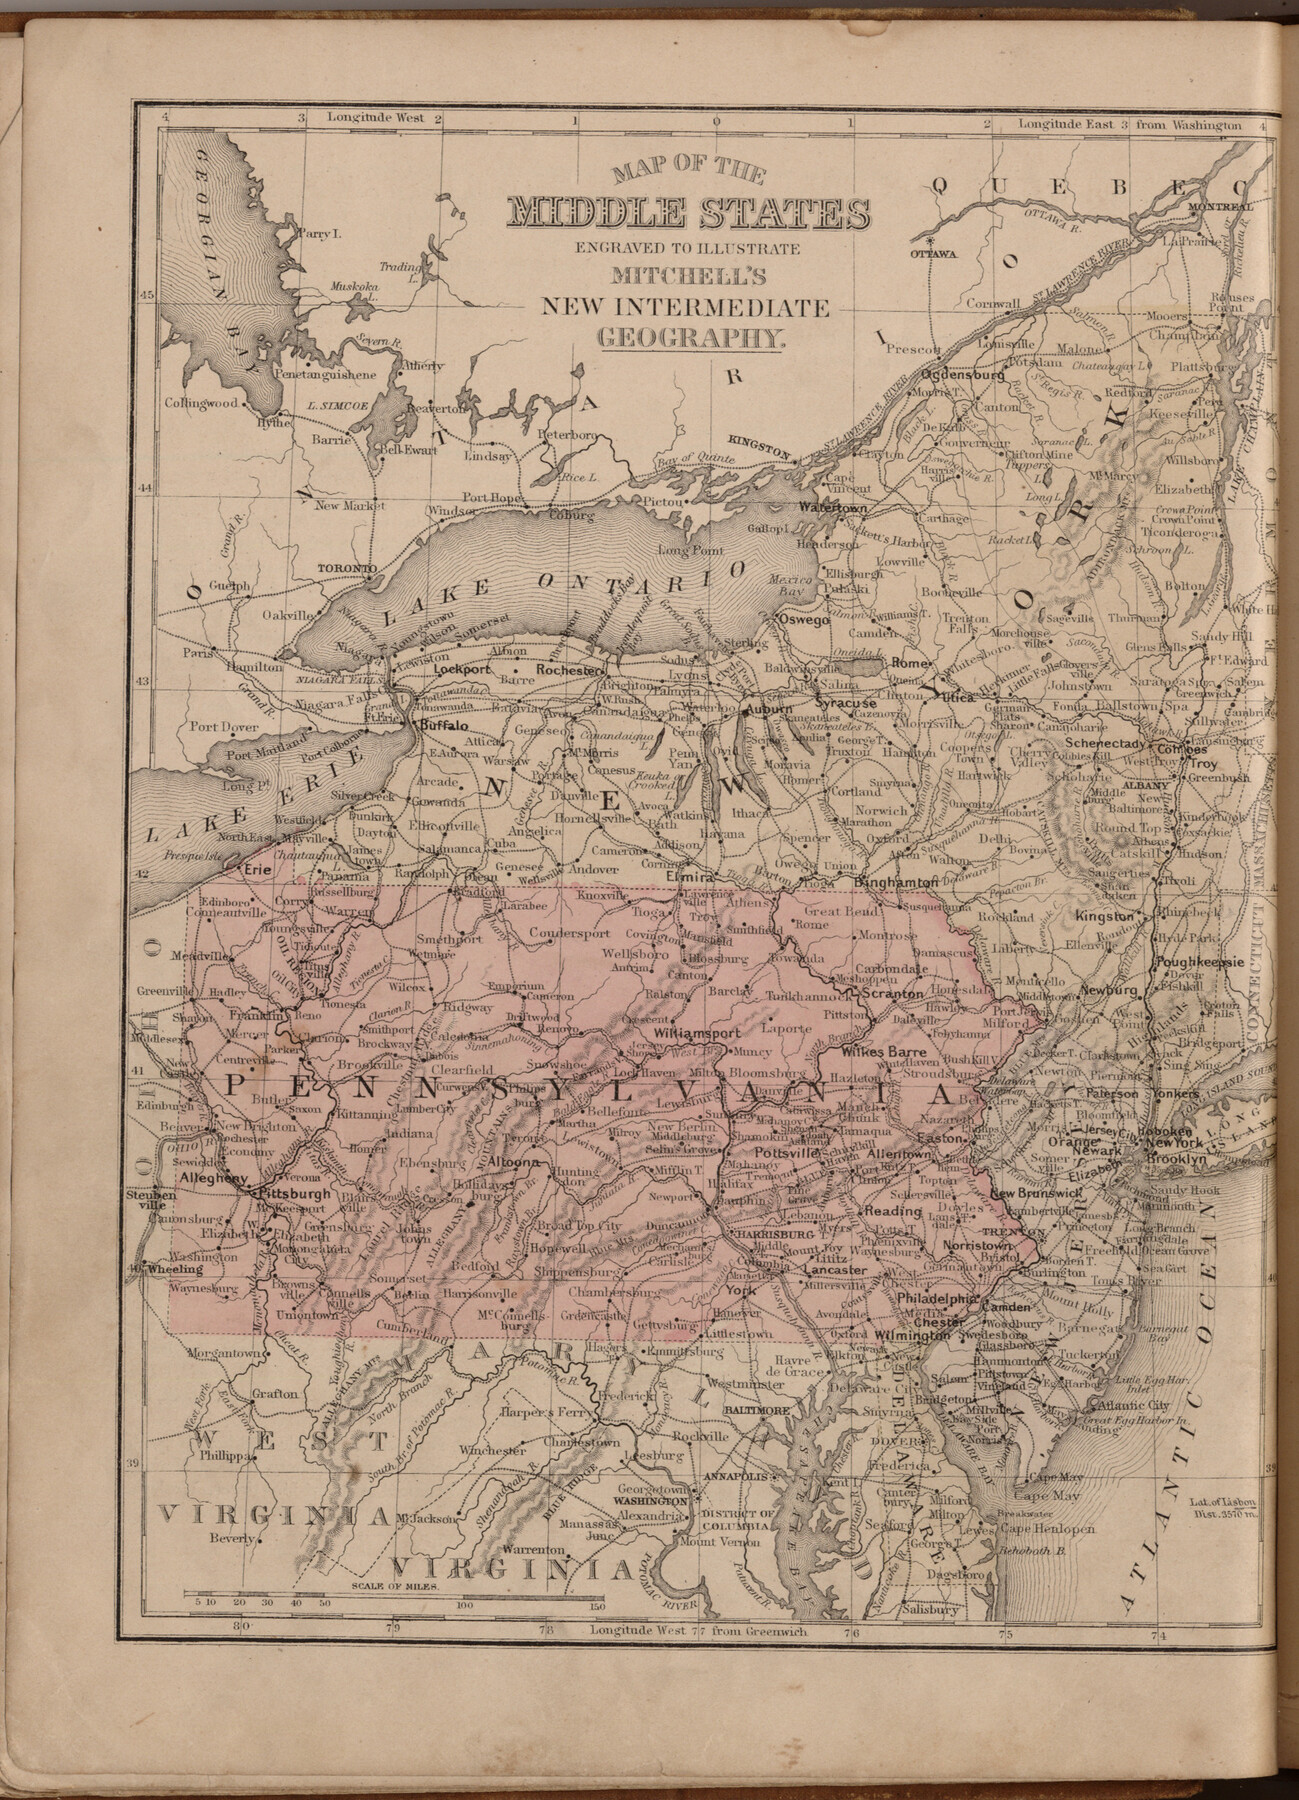 93516, Map of the Middle States engraved to illustrate Mitchell's new intermediate geography, General Map Collection